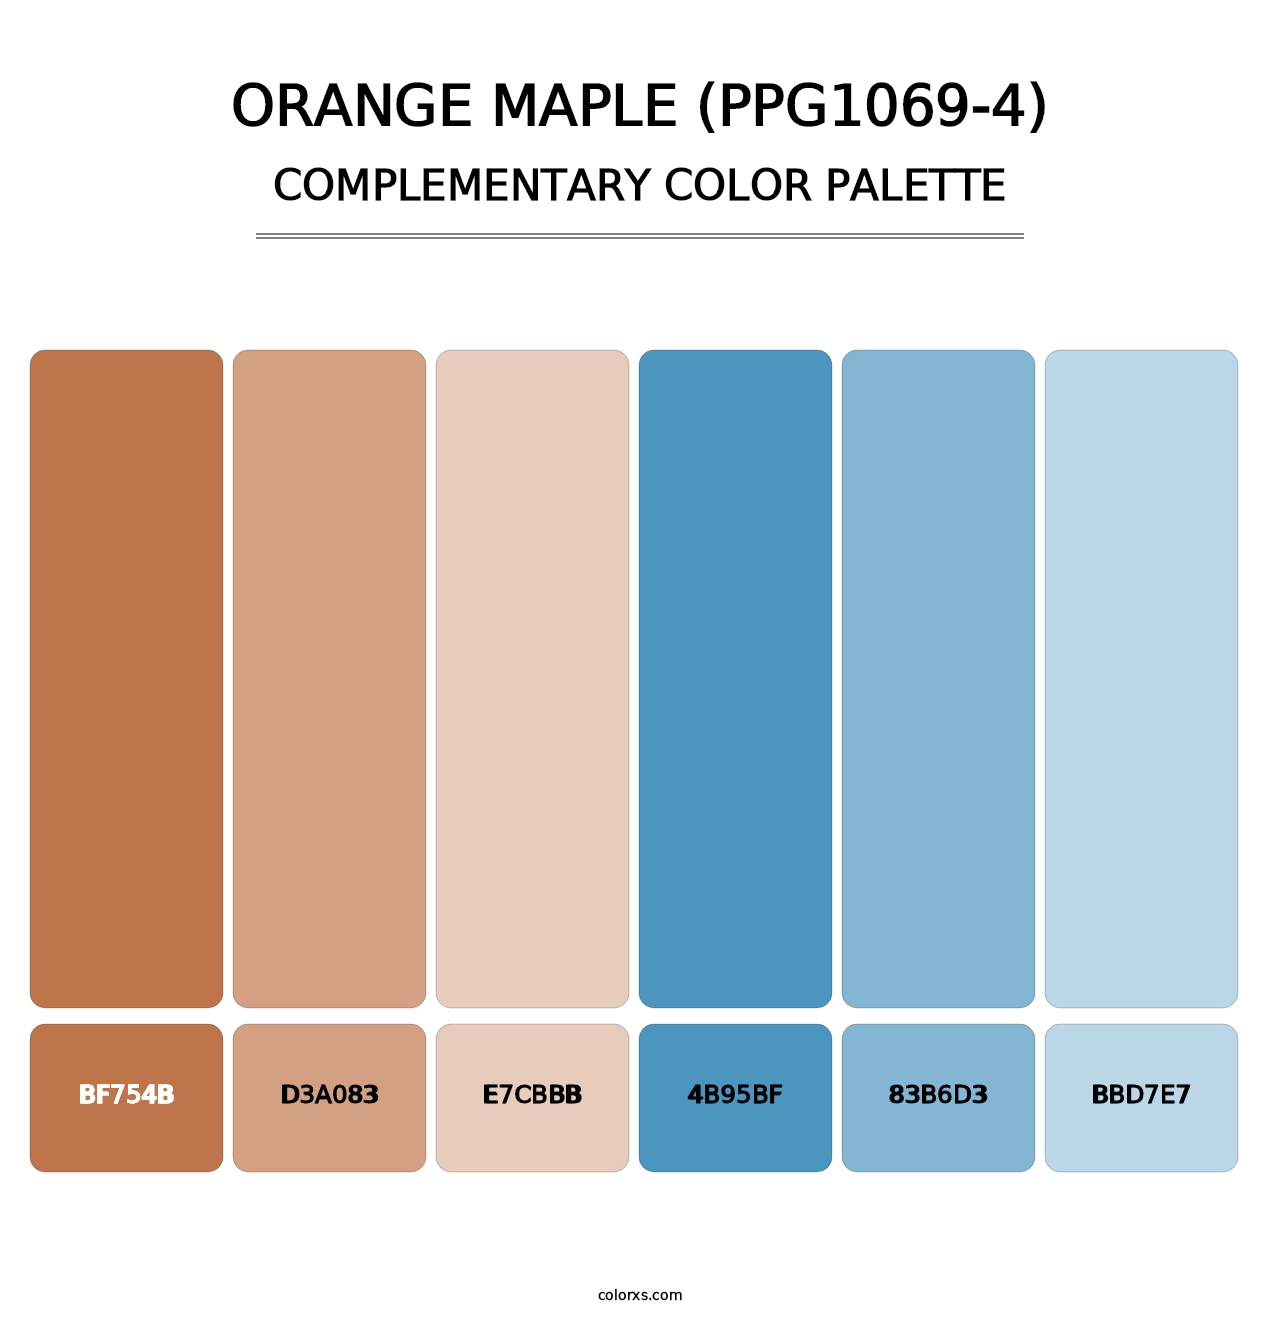 Orange Maple (PPG1069-4) - Complementary Color Palette